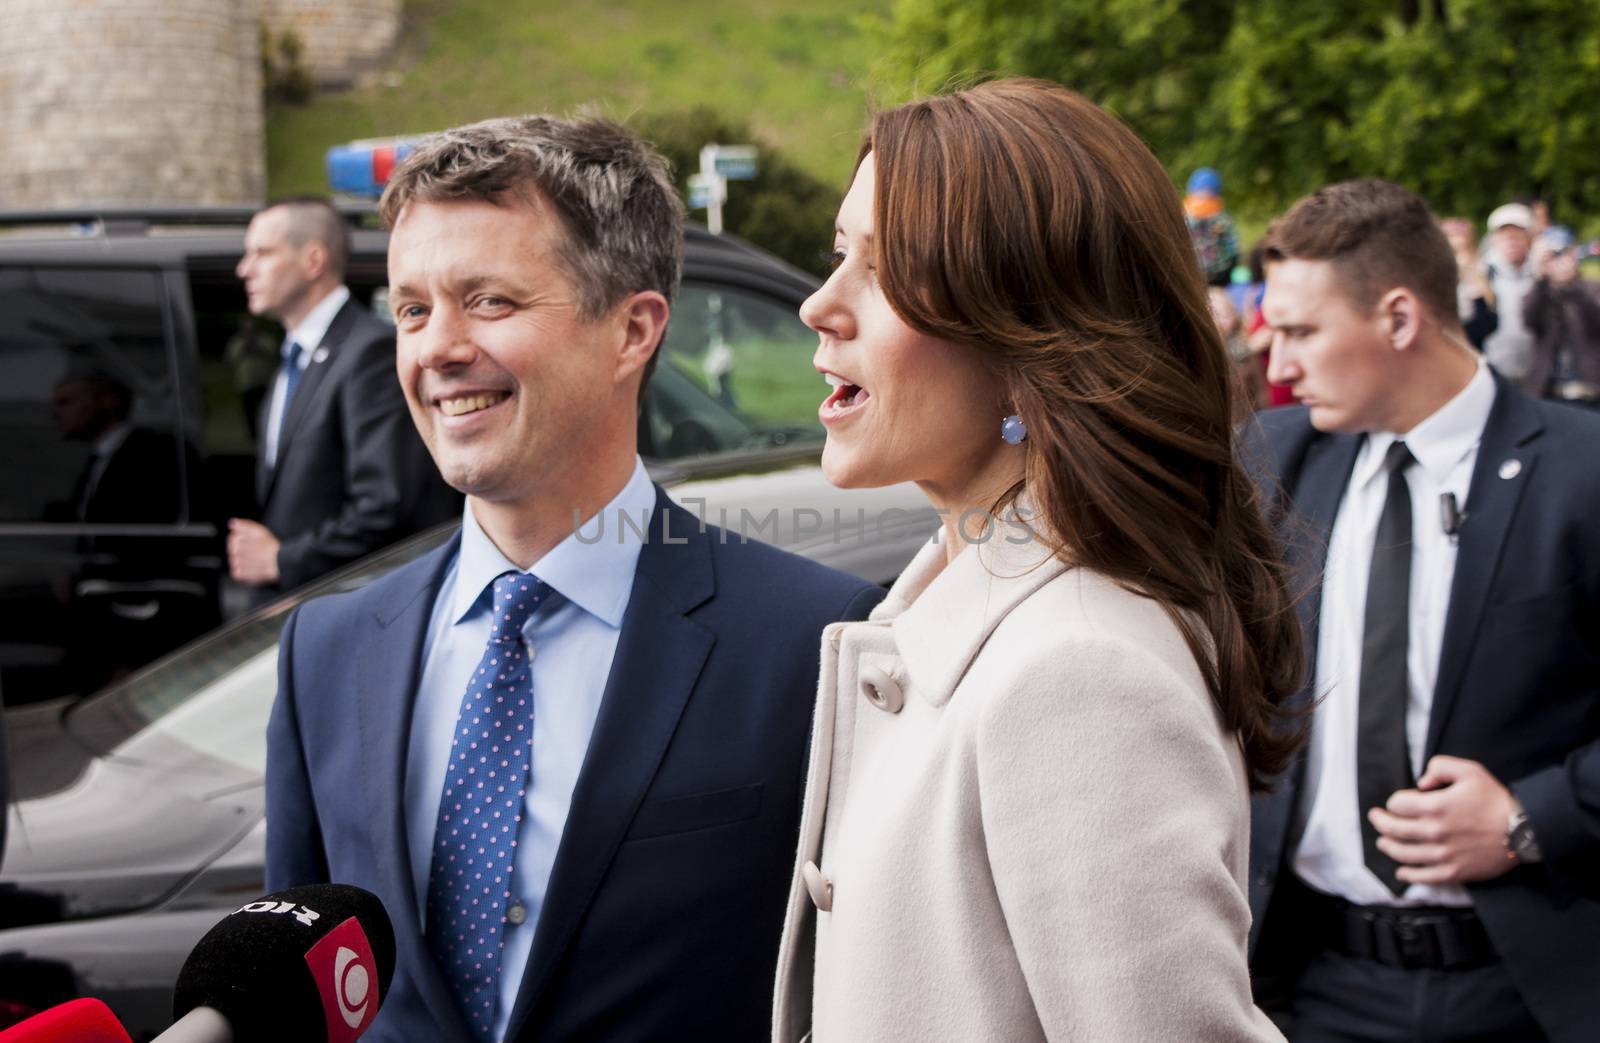 Szczecin, Poland - Mai 14, 2014: Denmark Prince Frederik and Princess Mary, visit in Poland. Both happy and smilling.